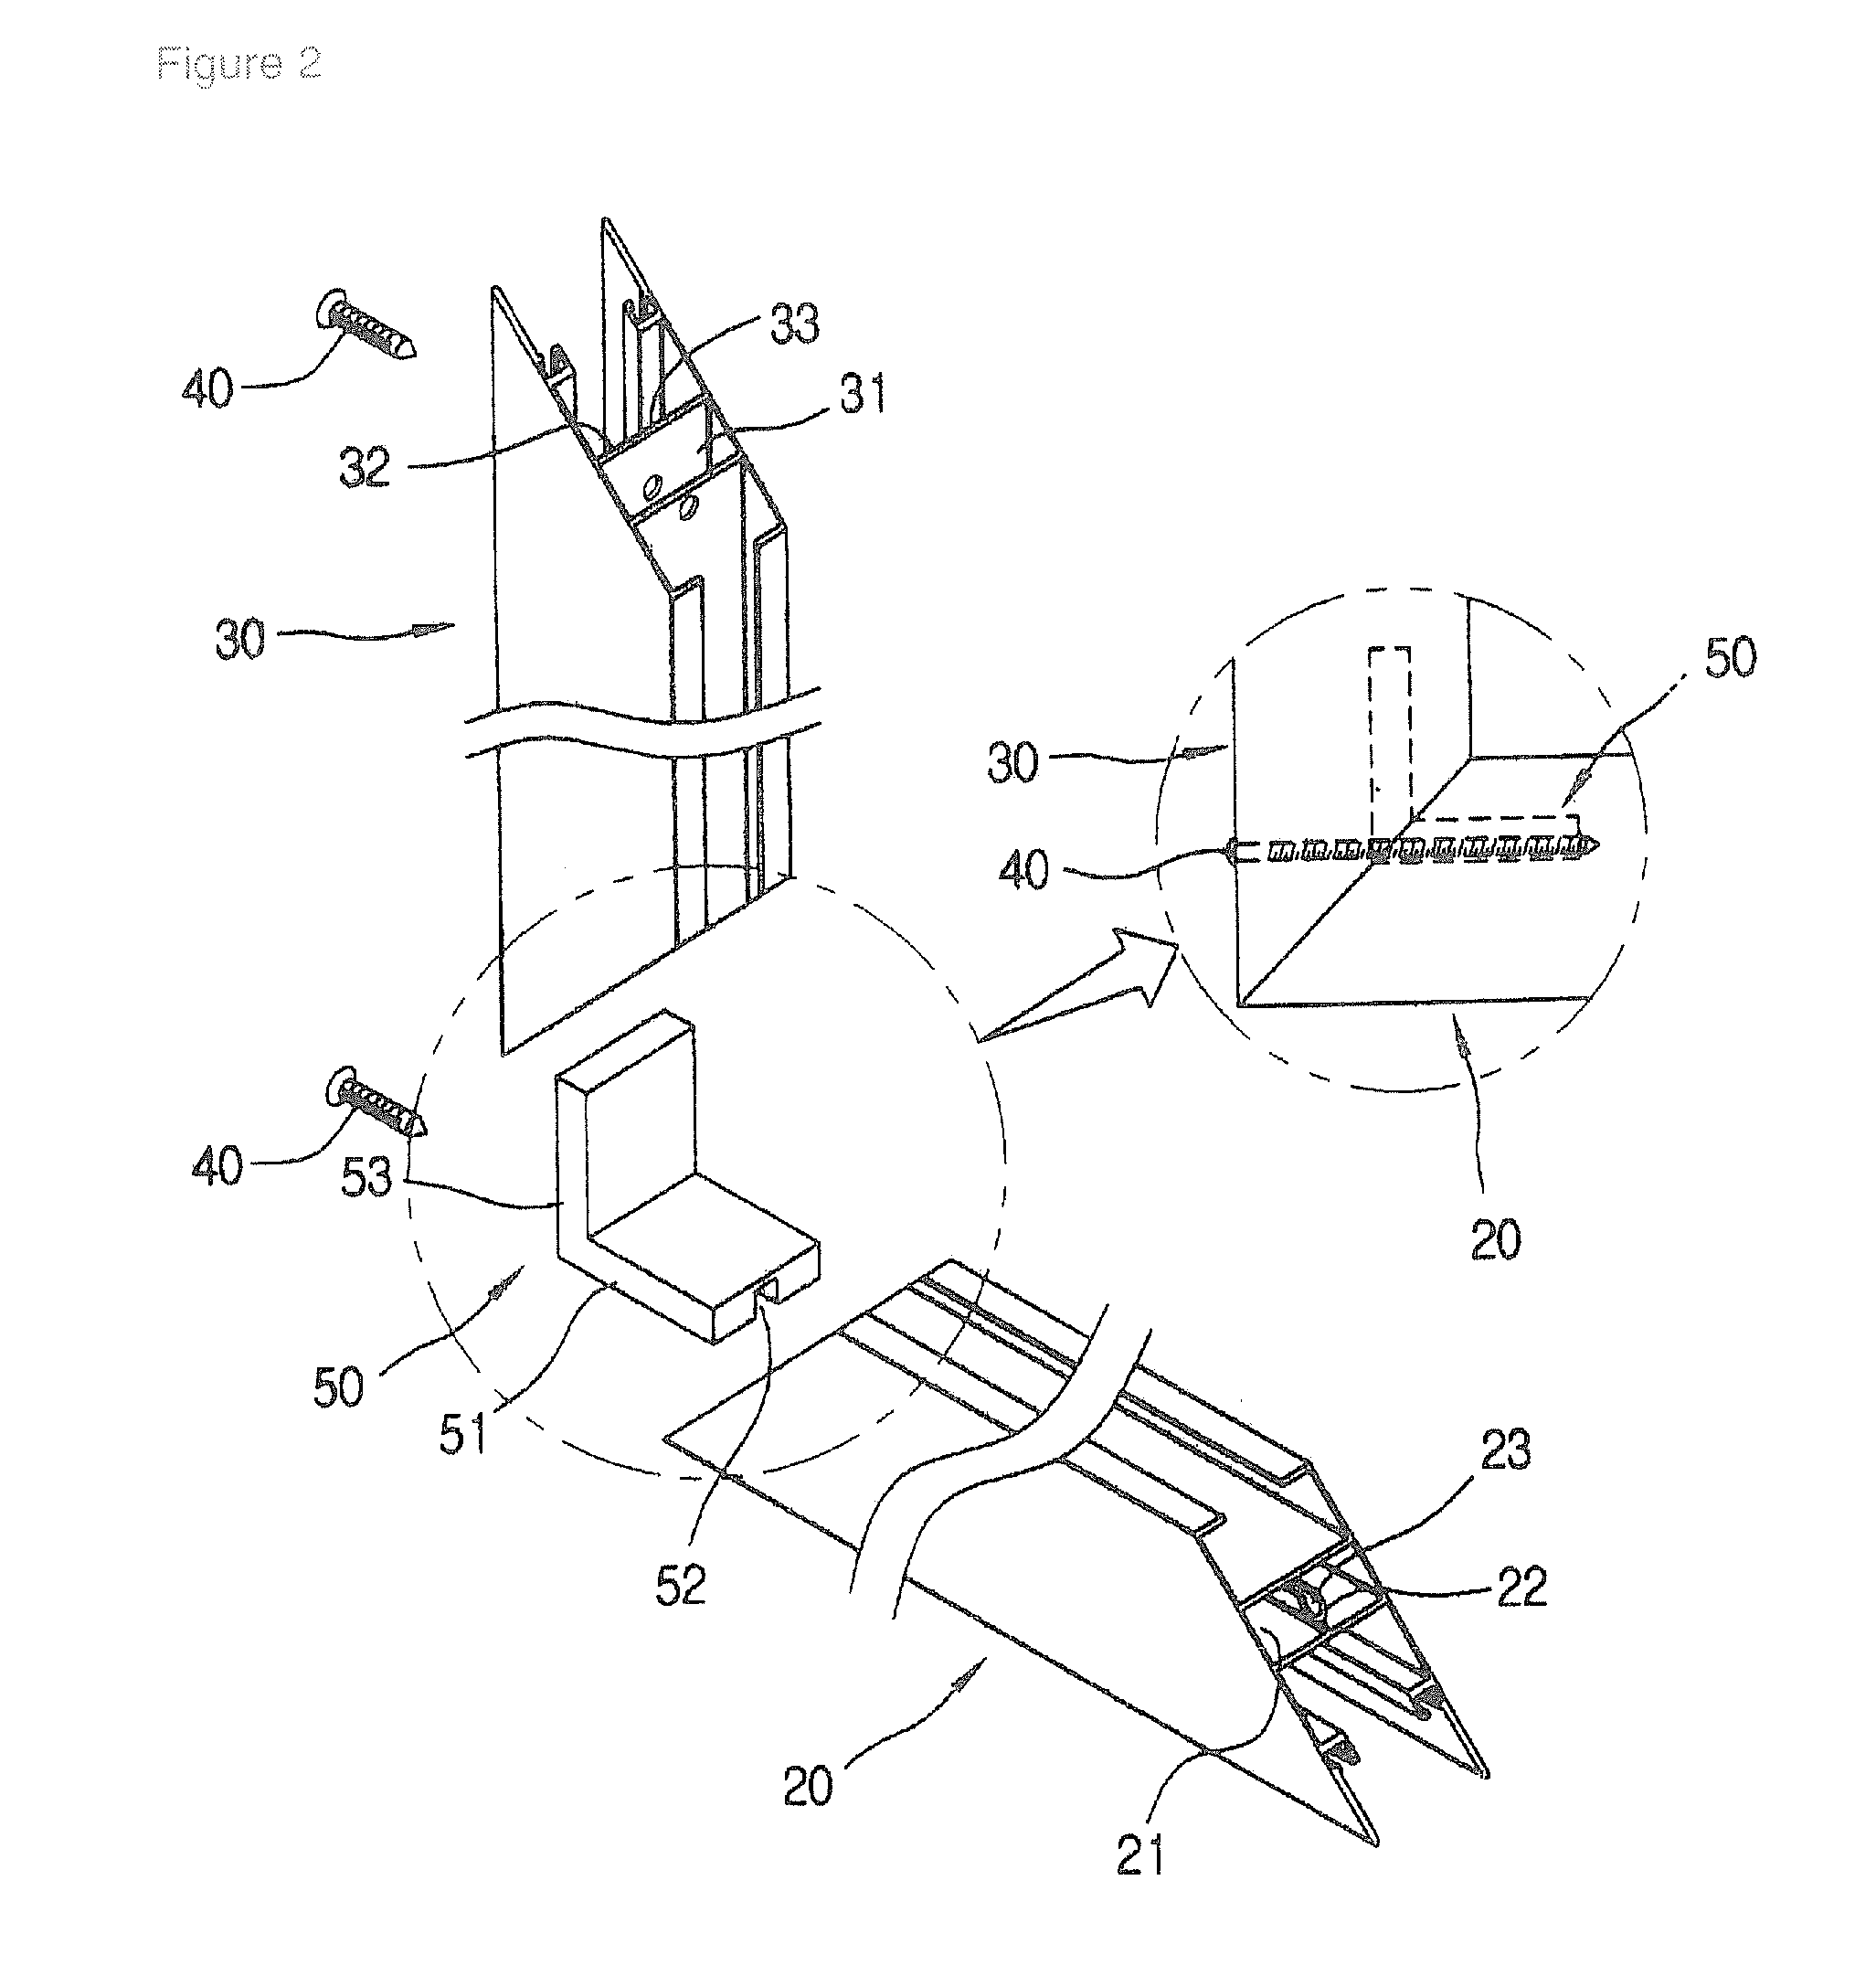 Windows and doors assembly structure having a joint portion of 45 degrees